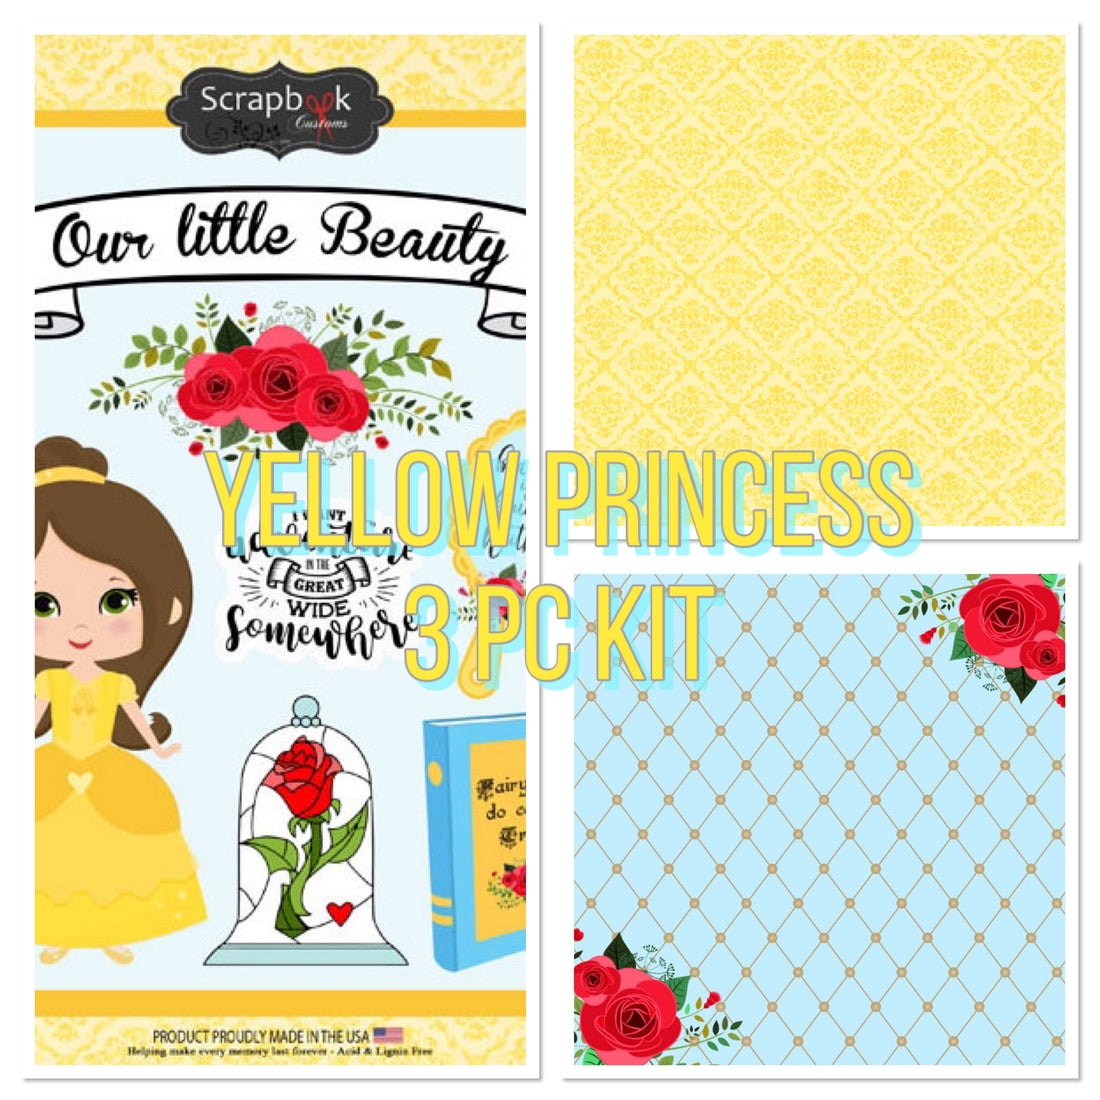 YELLOW PRINCESS KIT Belle Beauty and the Beast 9pc